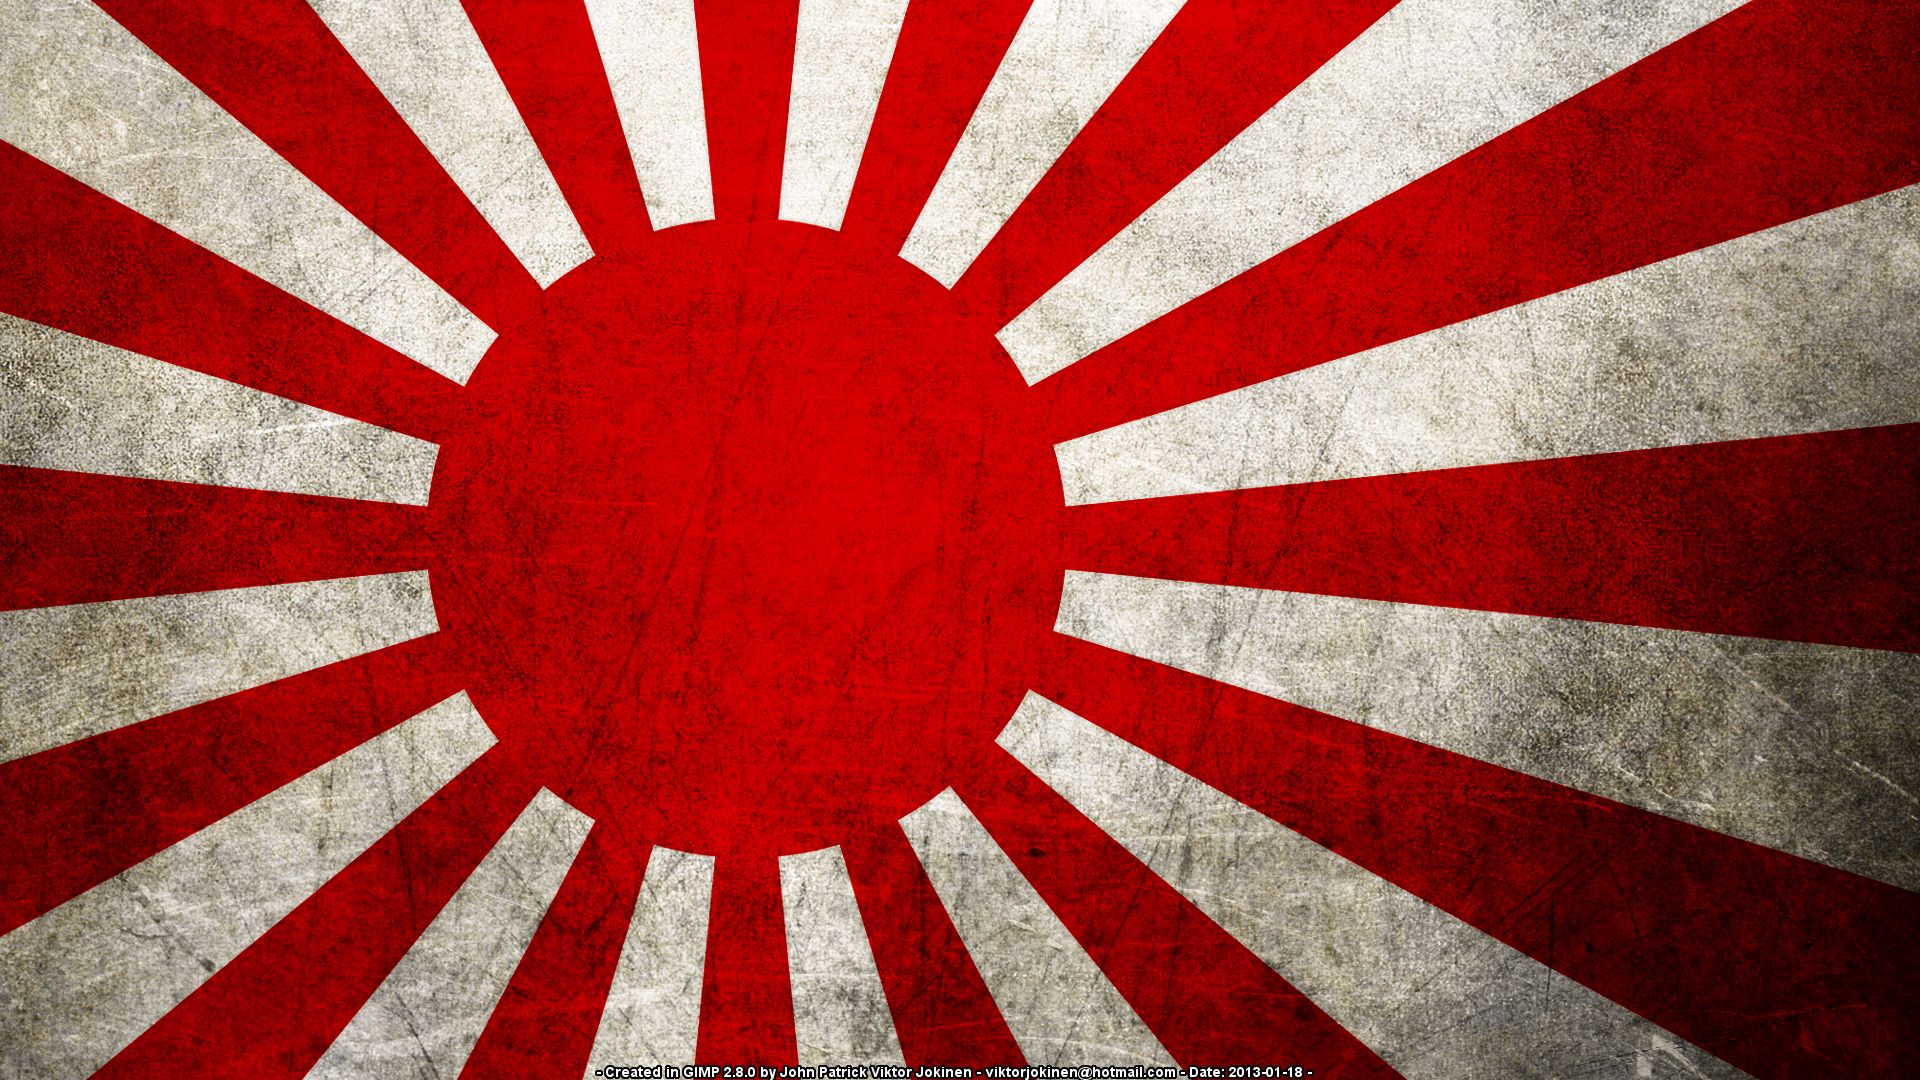 Red Sun Wallpapers